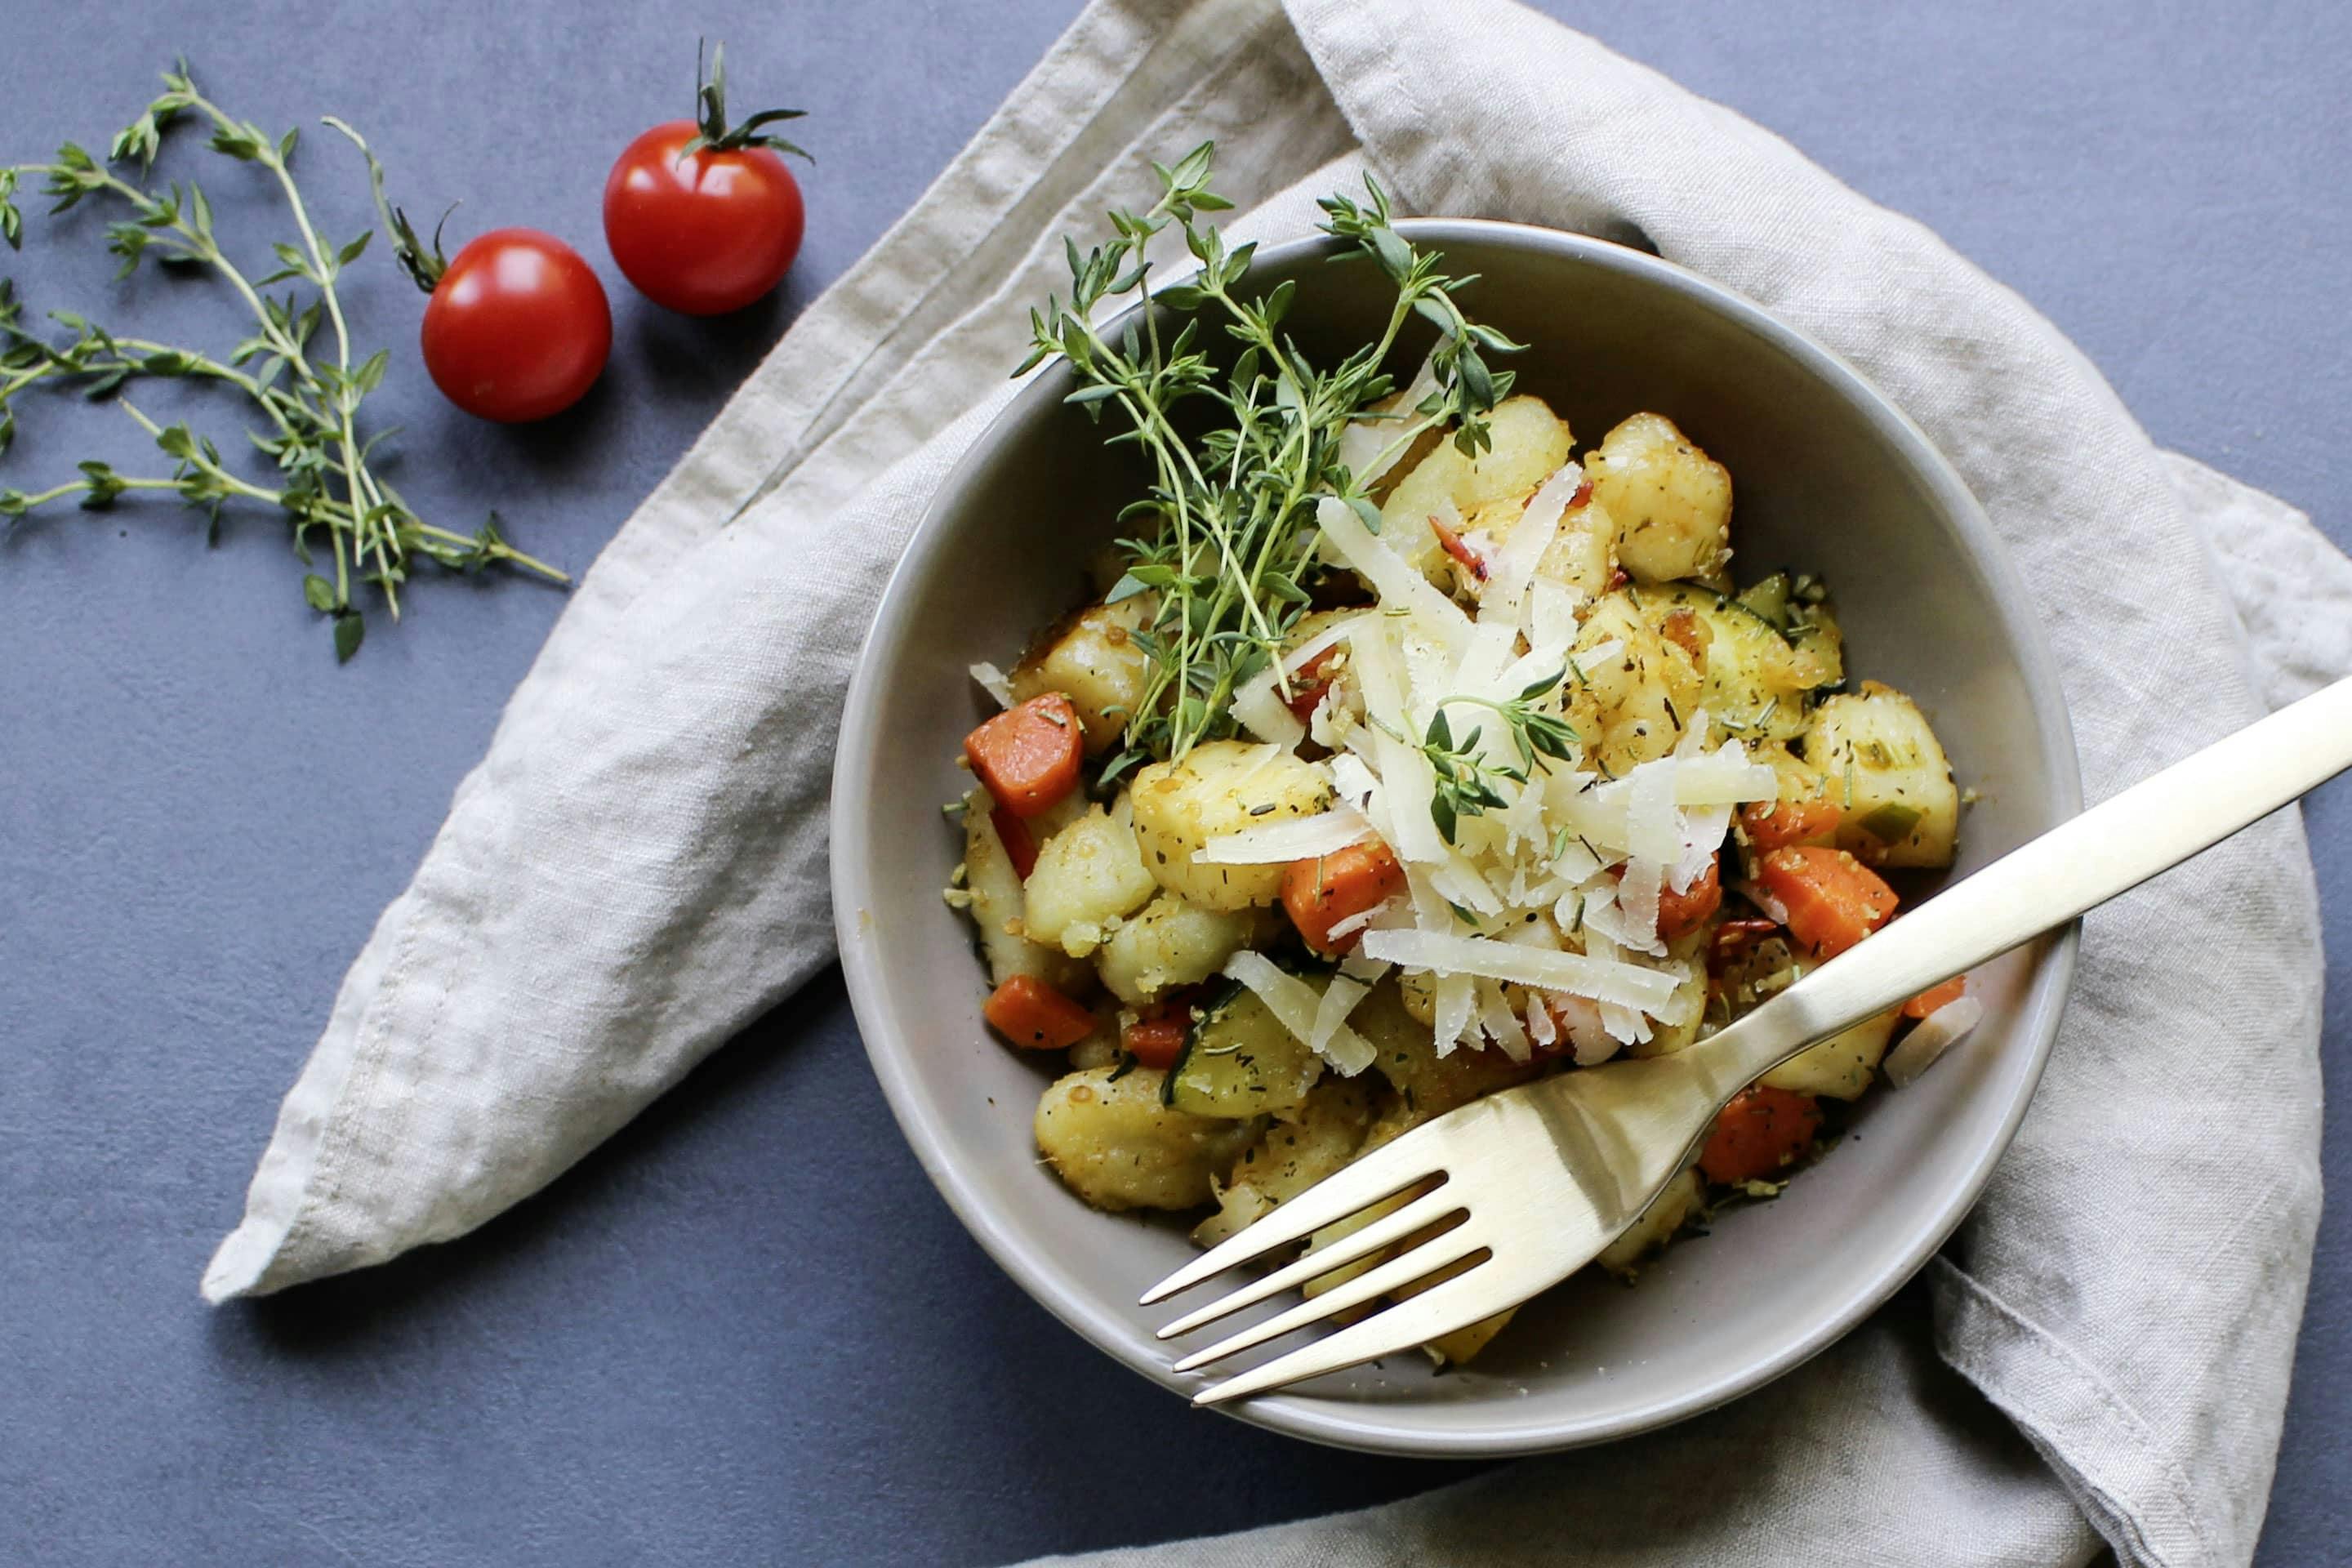 Gnocchi with grilled vegetables and halloumi in a light gray bowl with a golden fork, parmesan and fresh thyme sprigs